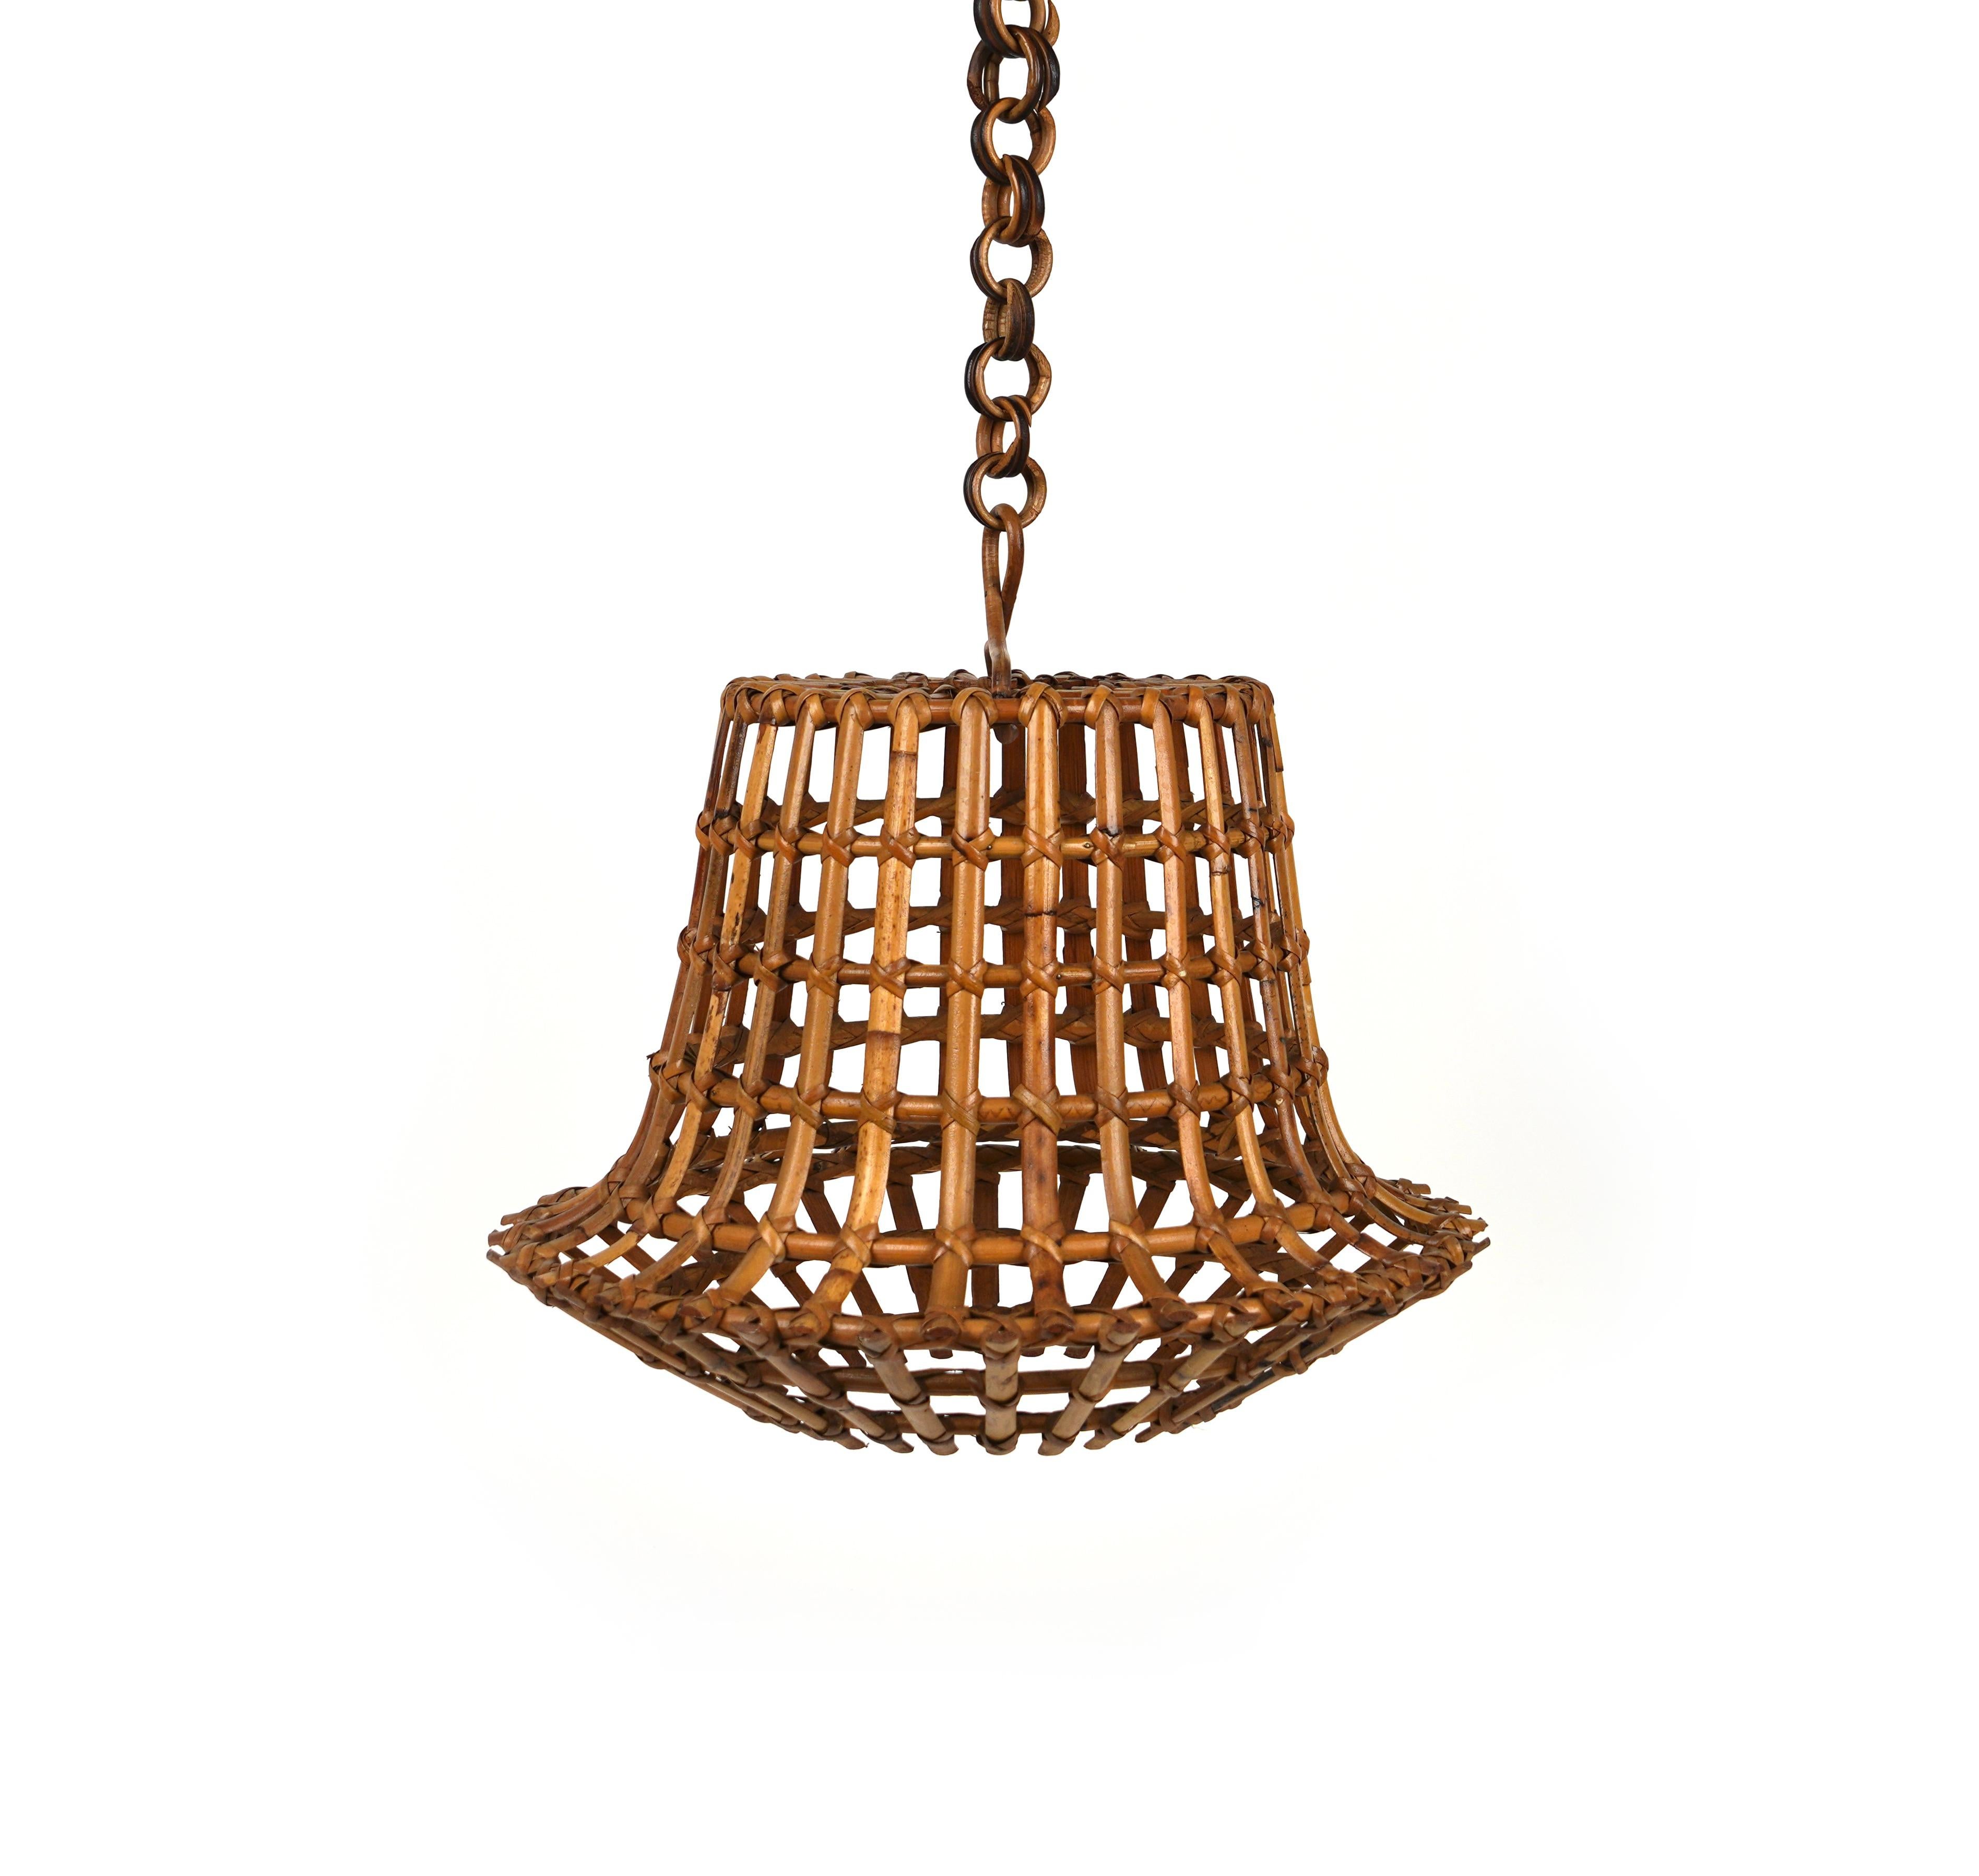 Midcentury Bamboo and Rattan Chandelier Louis Sognot Style, Italy 1960s For Sale 1